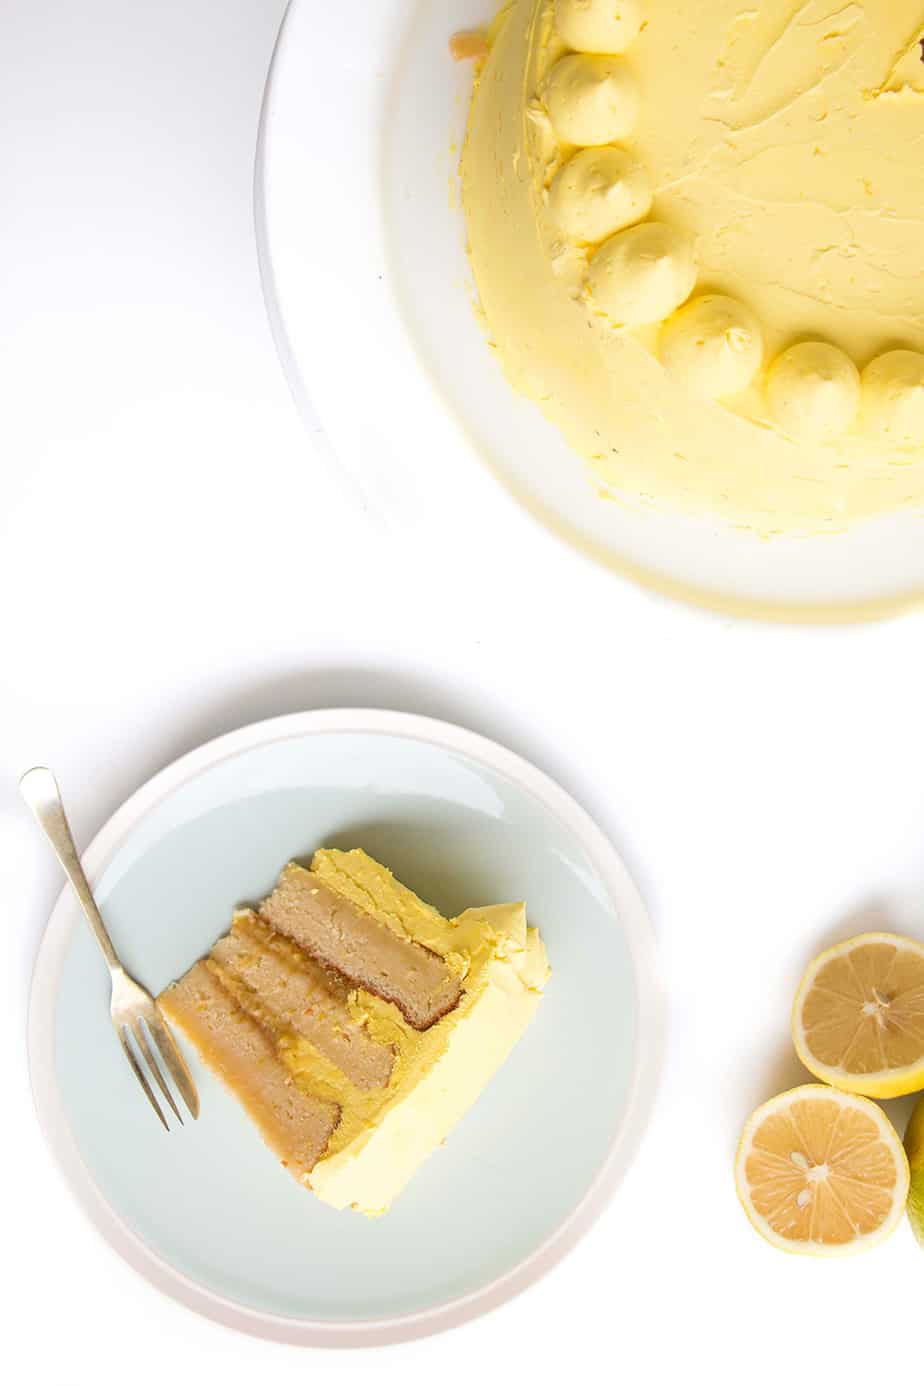 Zesty Lemon Cake with Lemon Italian Meringue Buttercream - The most lemony cake that you will ever taste, so delicious and easy to make and will wow any guests with its incredible lemon taste.